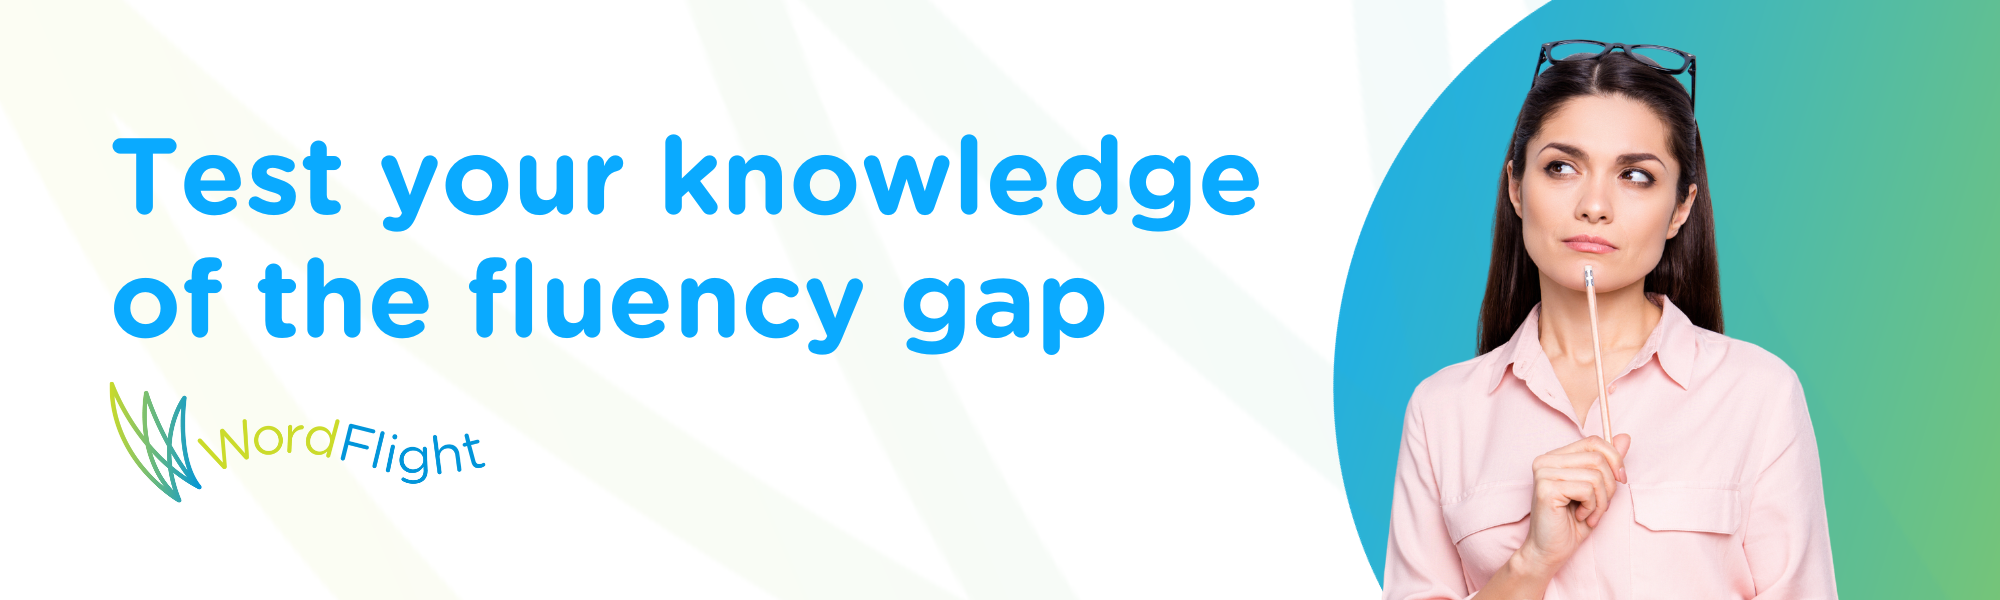 Test your knowledge of the fluency gap banner